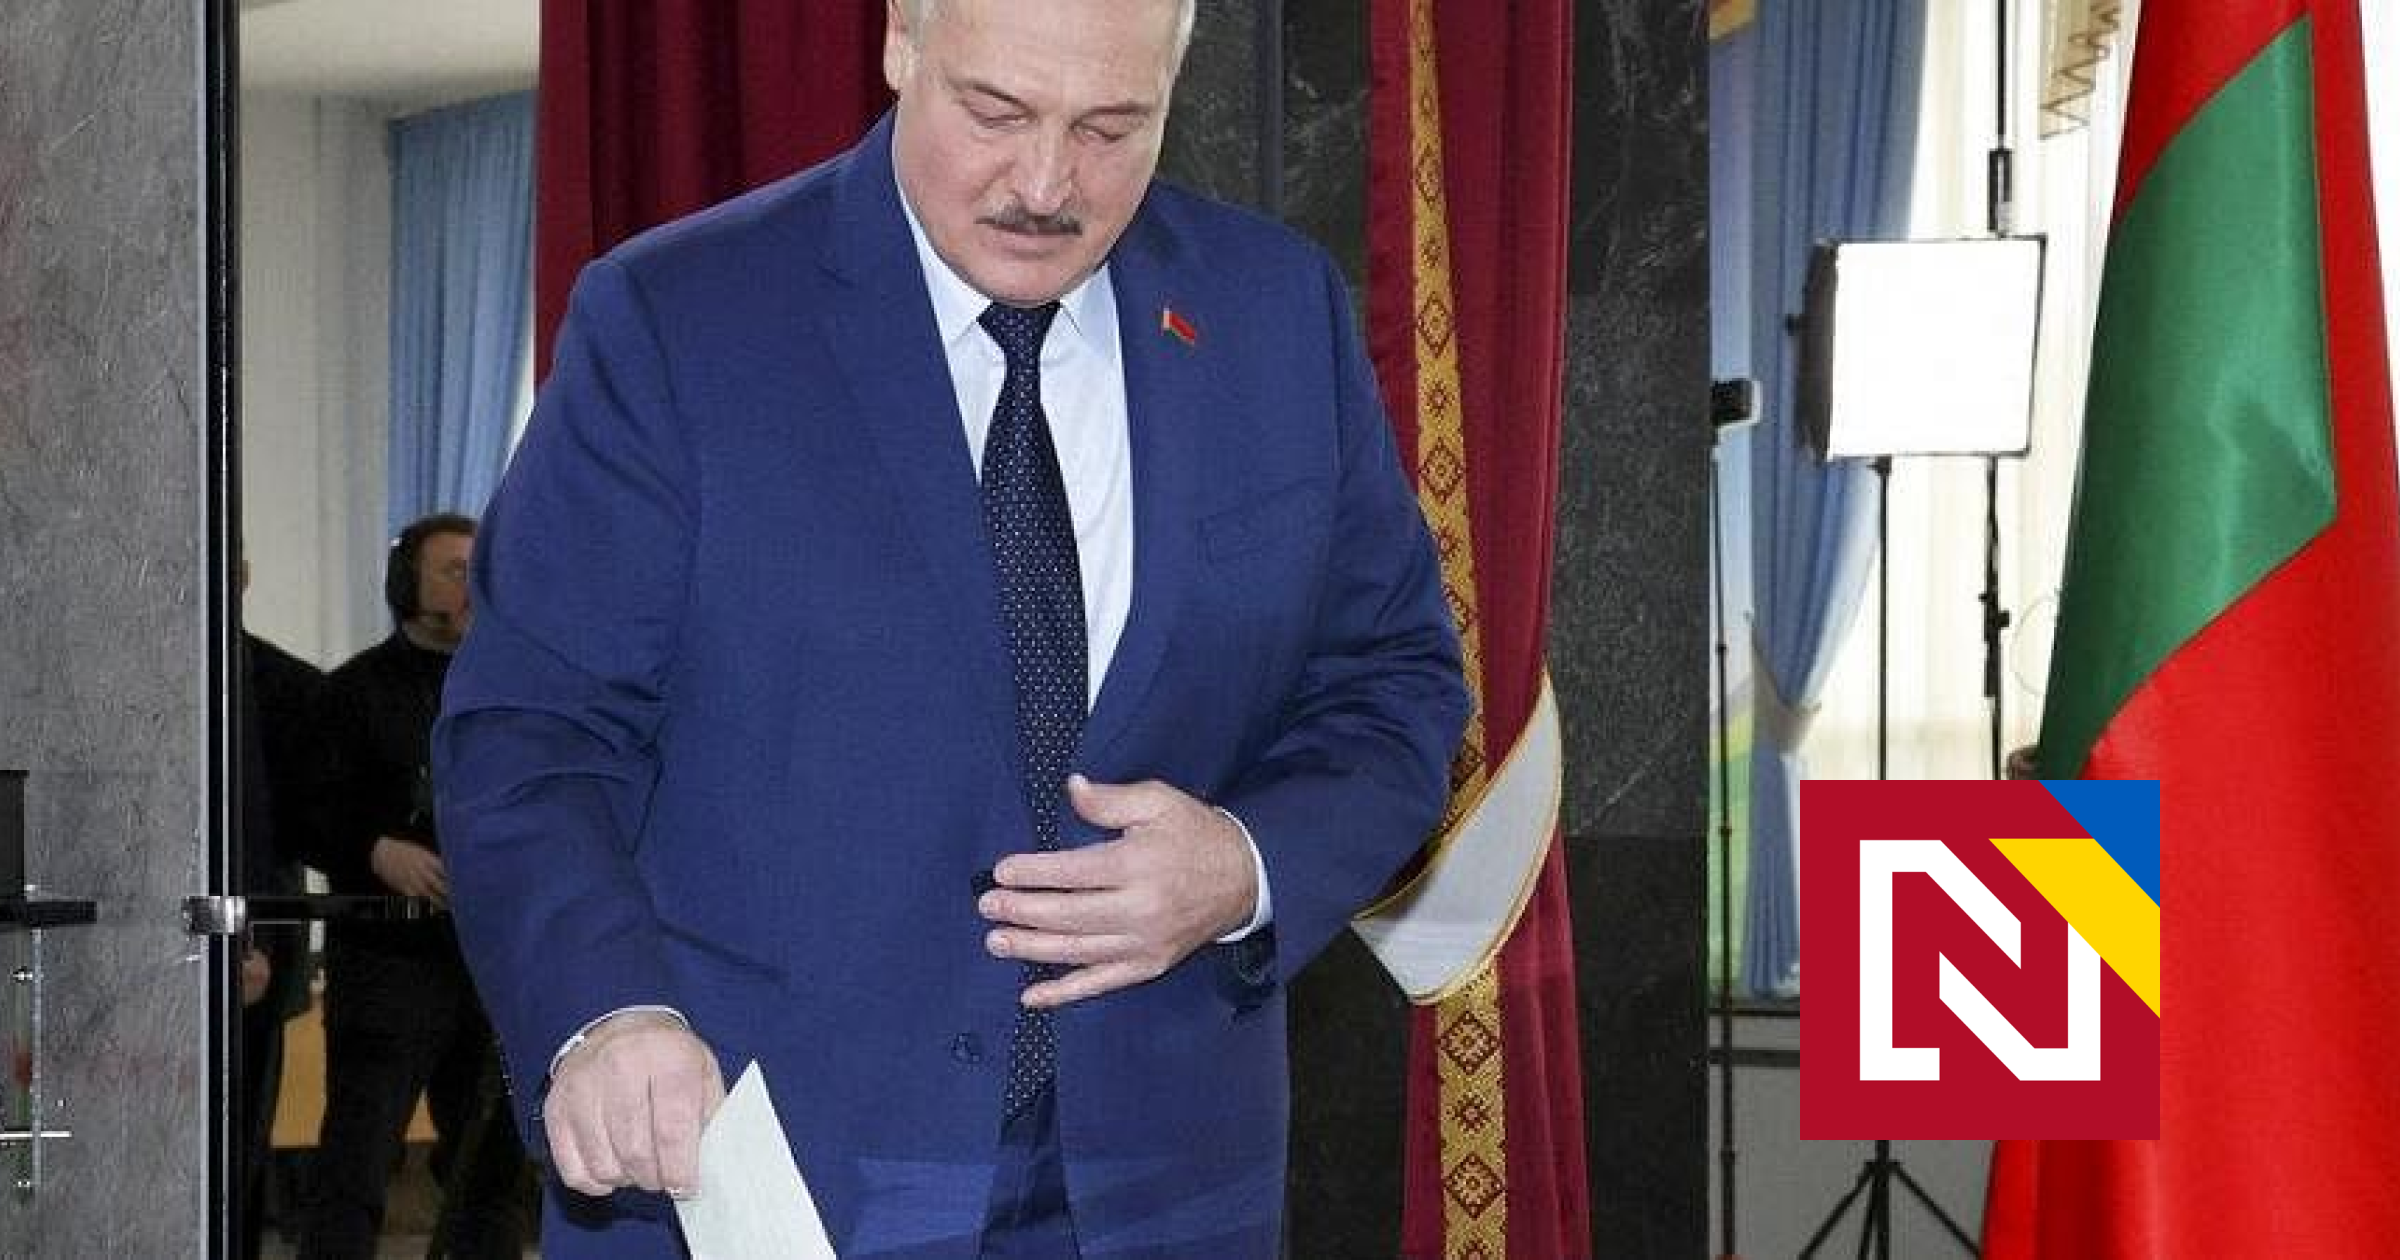 Speculations about Lukashenko’s illness are multiplying.  Analysts explain what that would mean